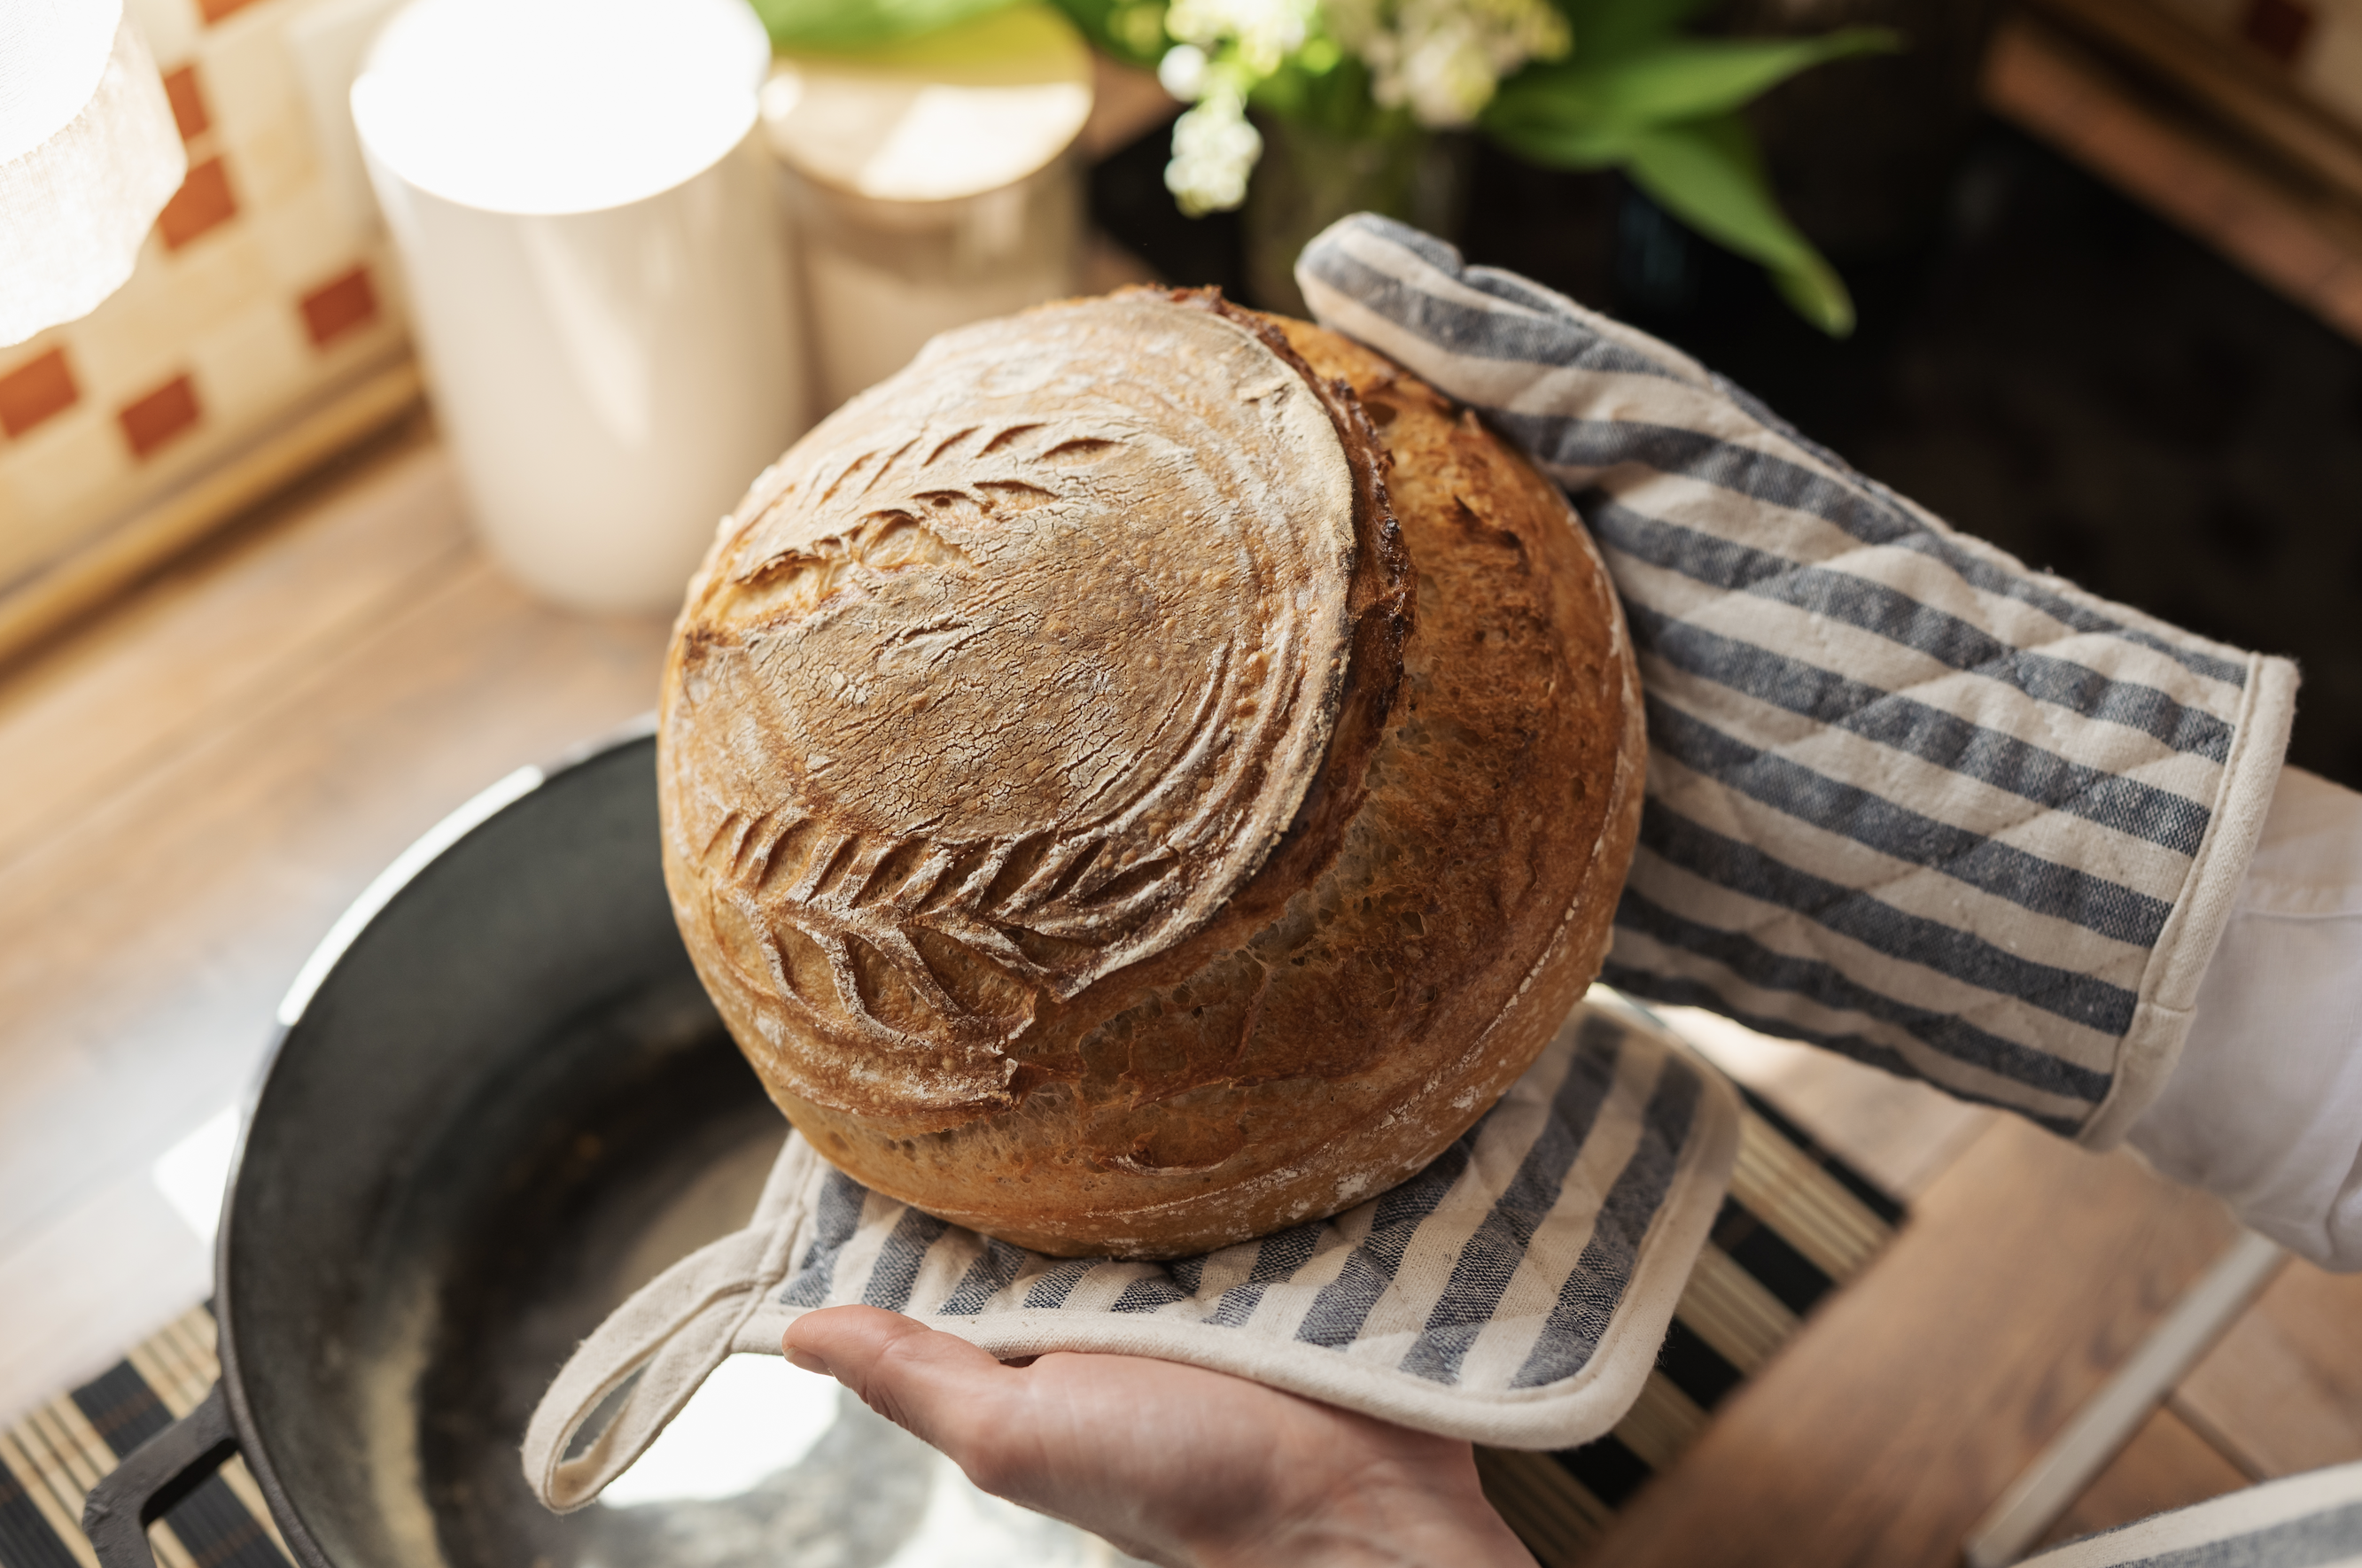 the sourdough people sourdough bread website online in canada with ecommerce products store community recipes industry interviews and brands 60132